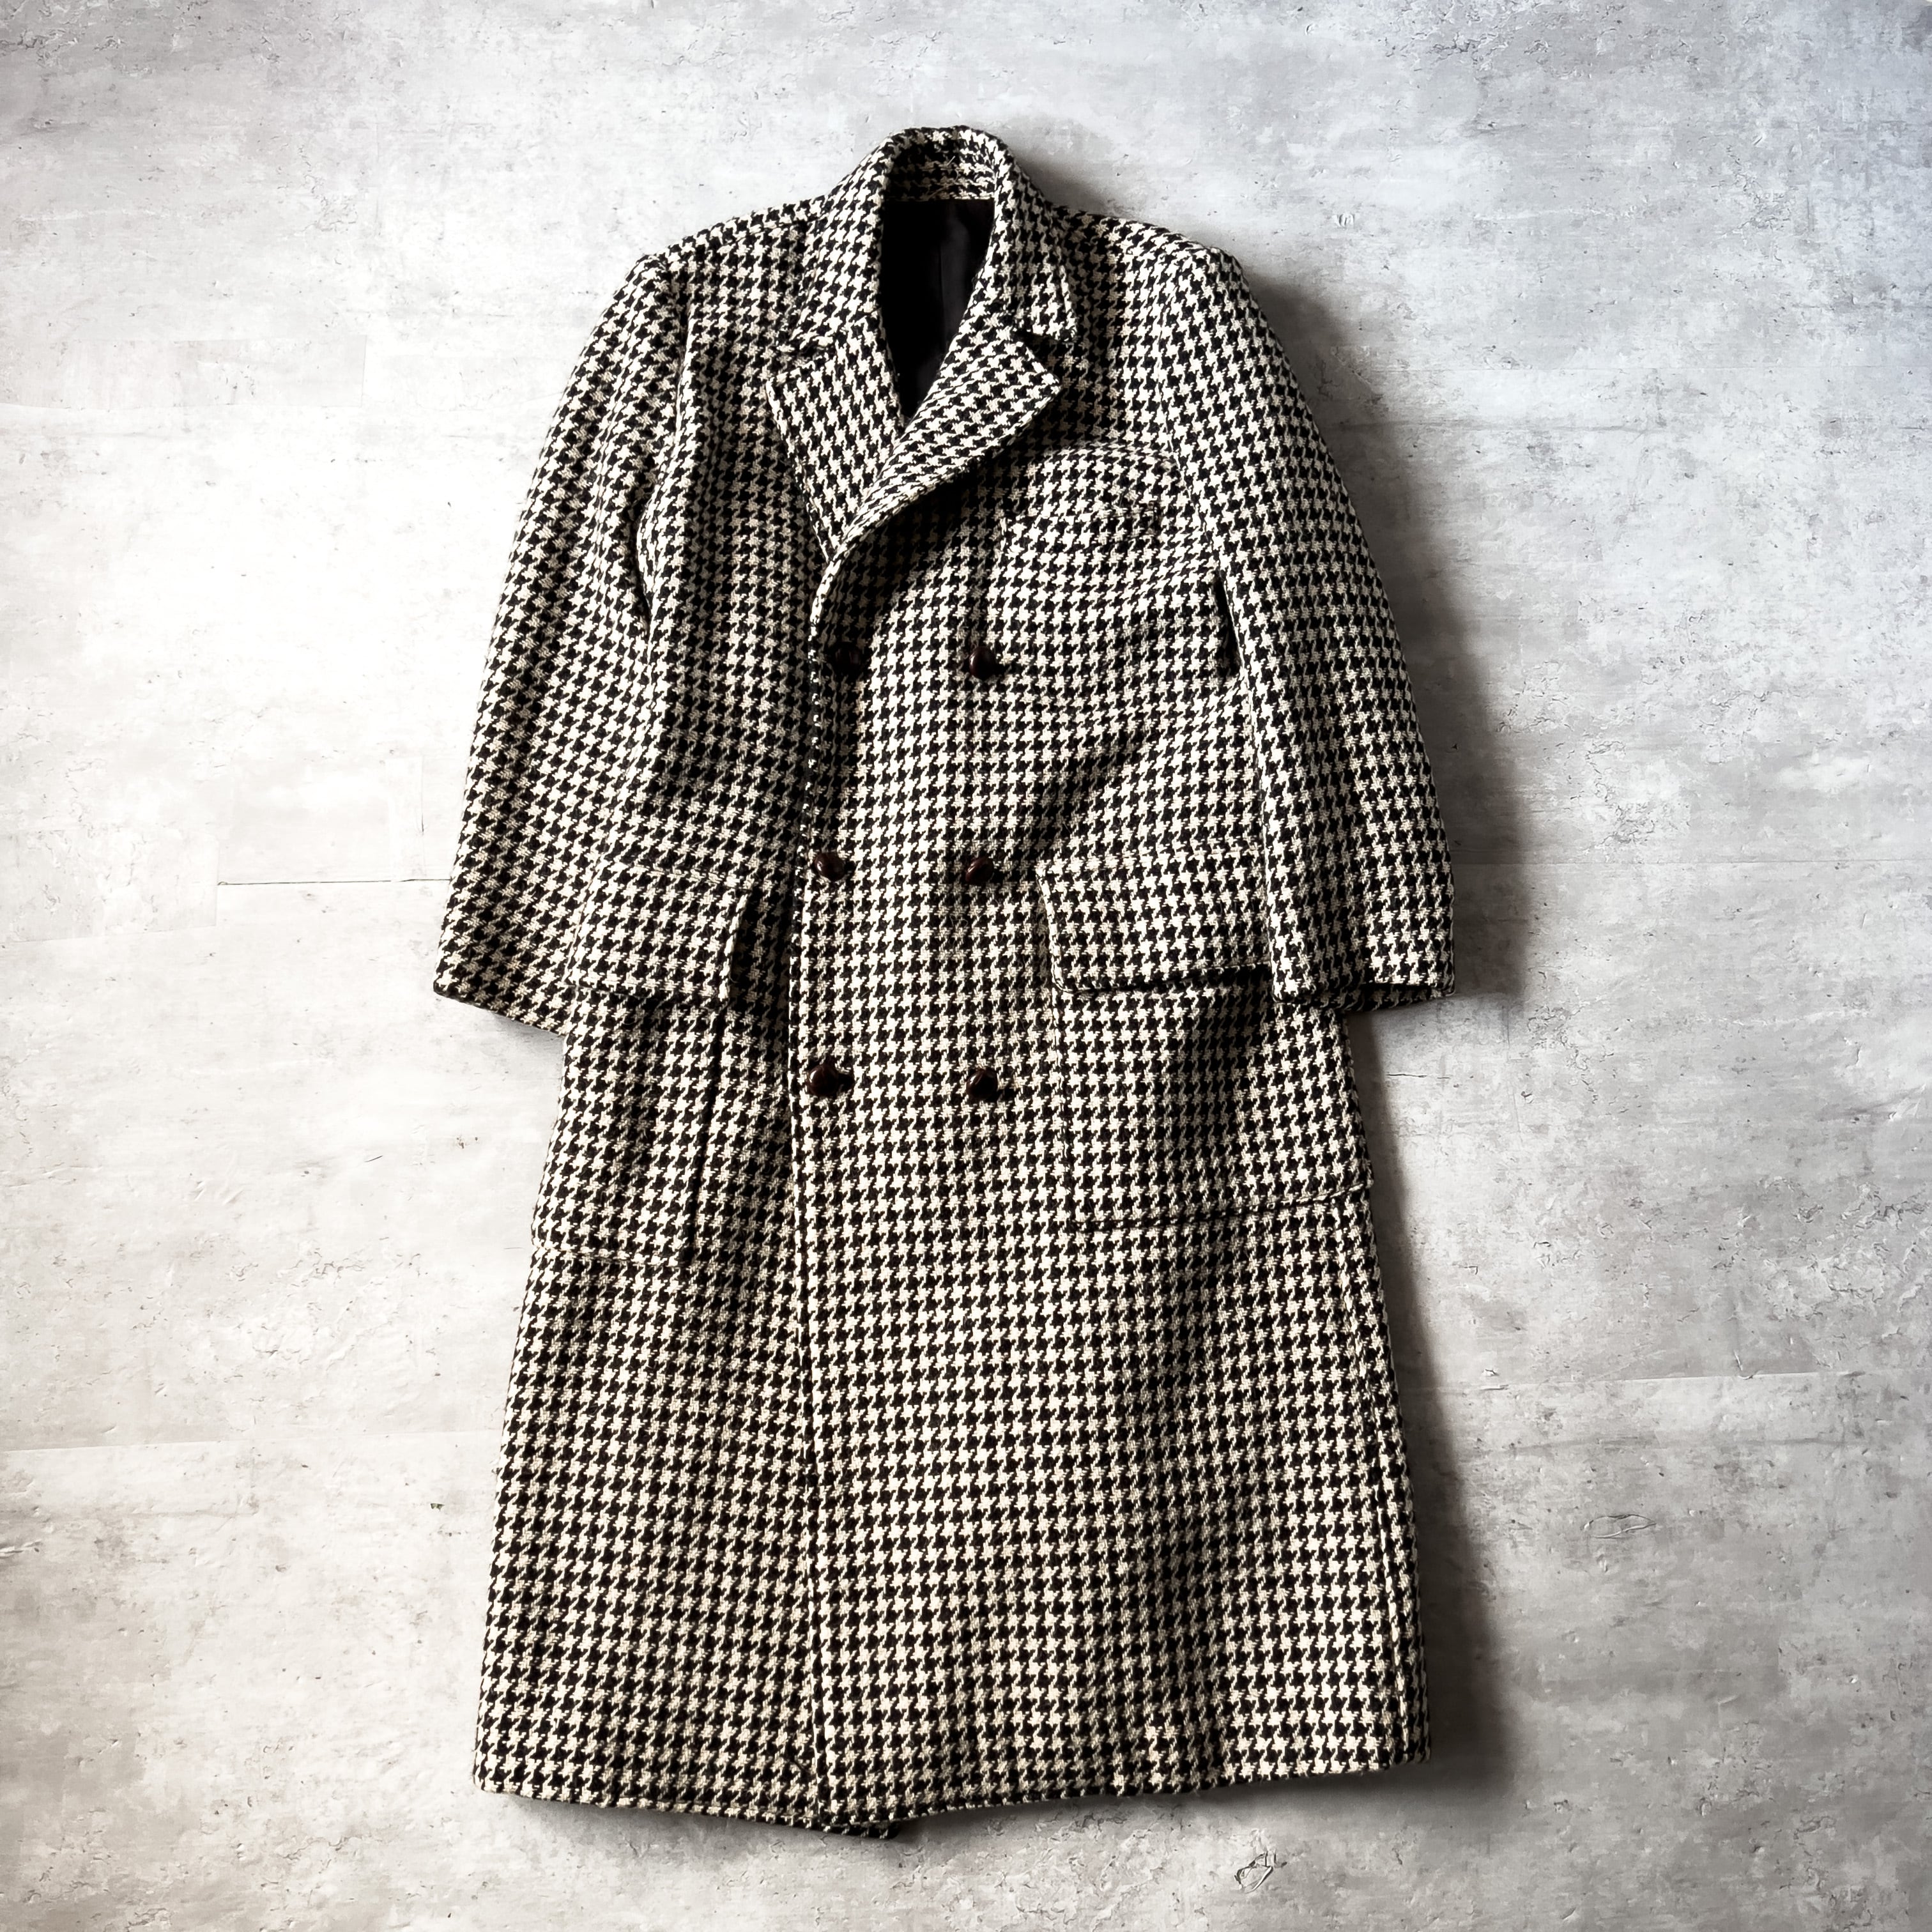 80s “I.S. ISSEY MIYAKE” houndstooth pattern wool double-breasted